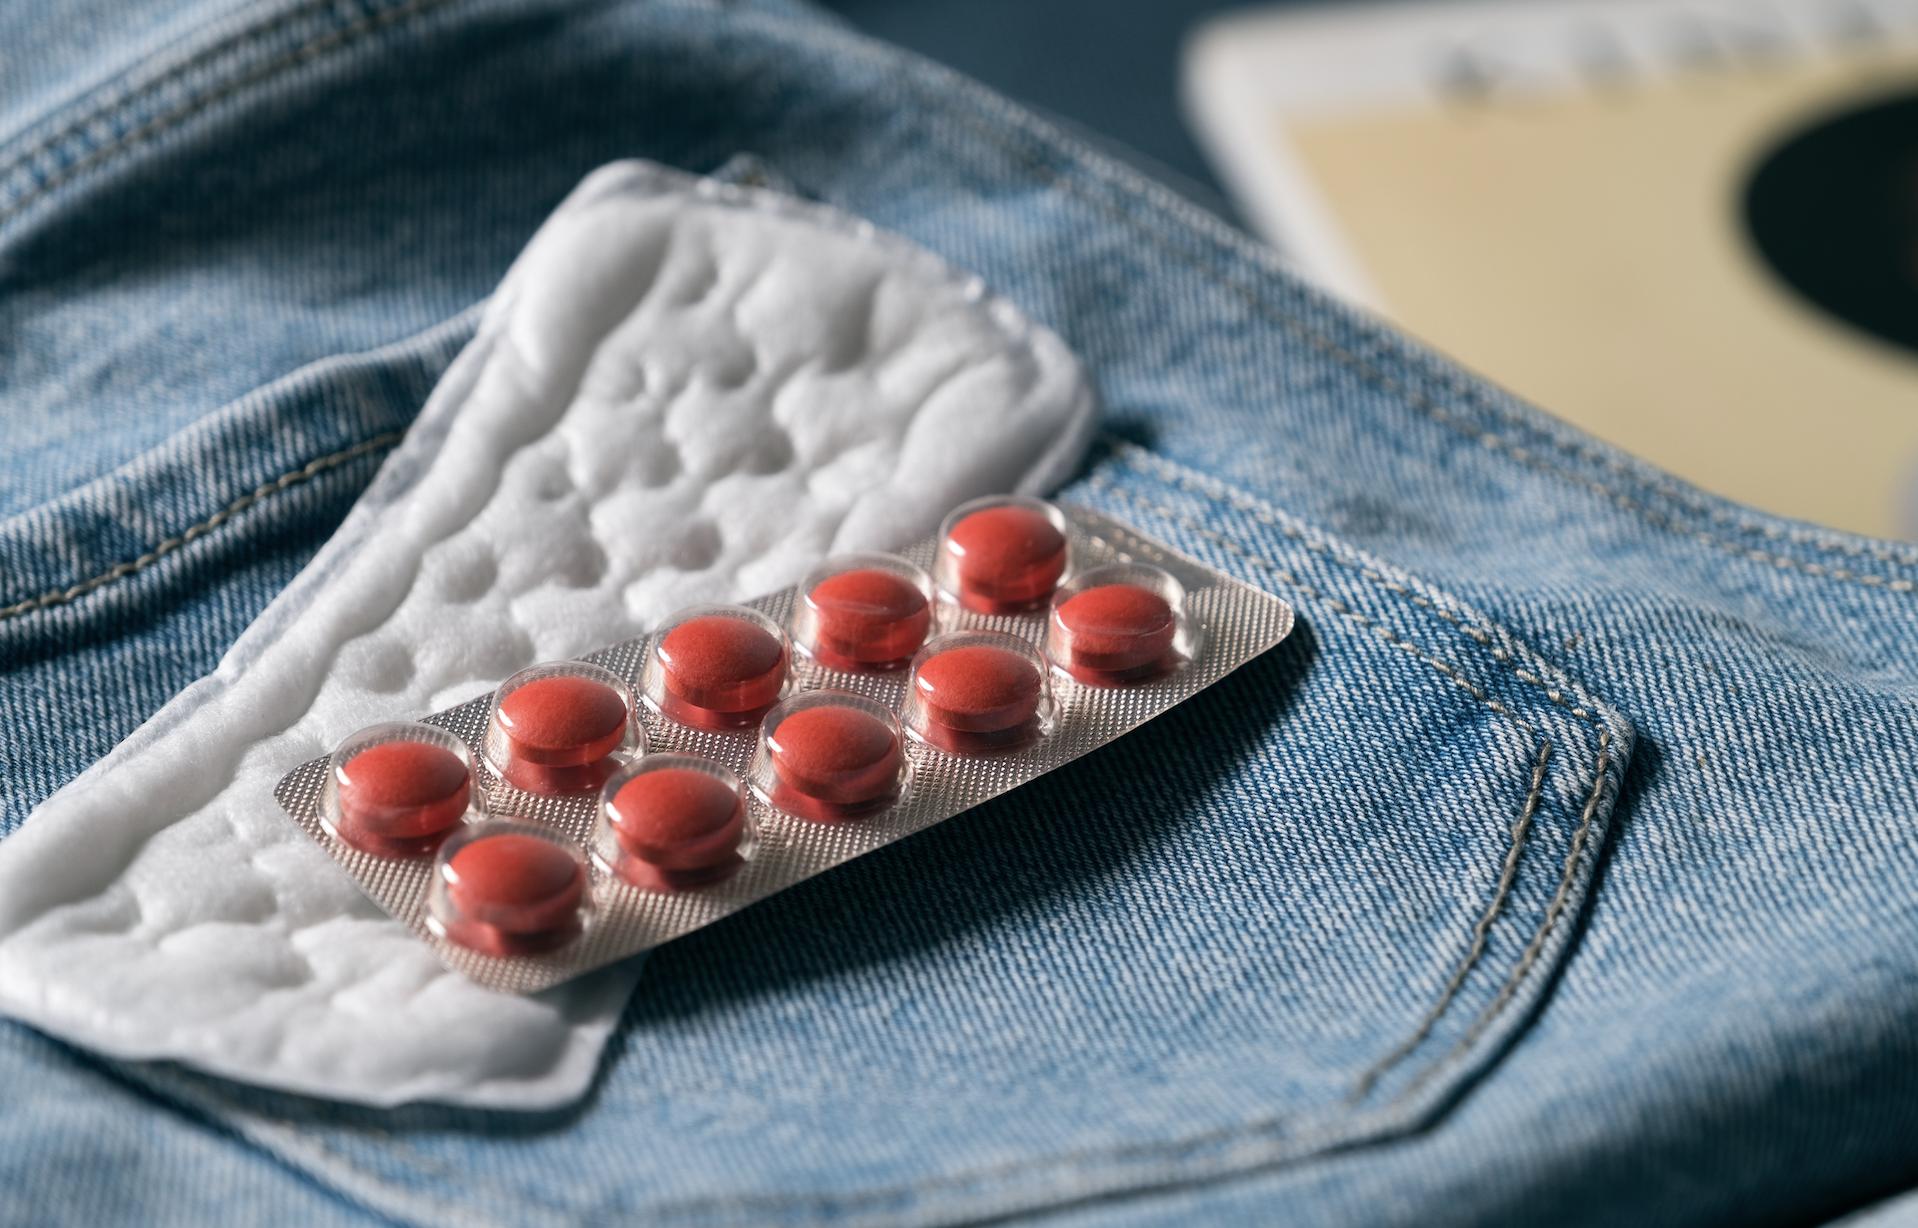 6 medications that may affect your period